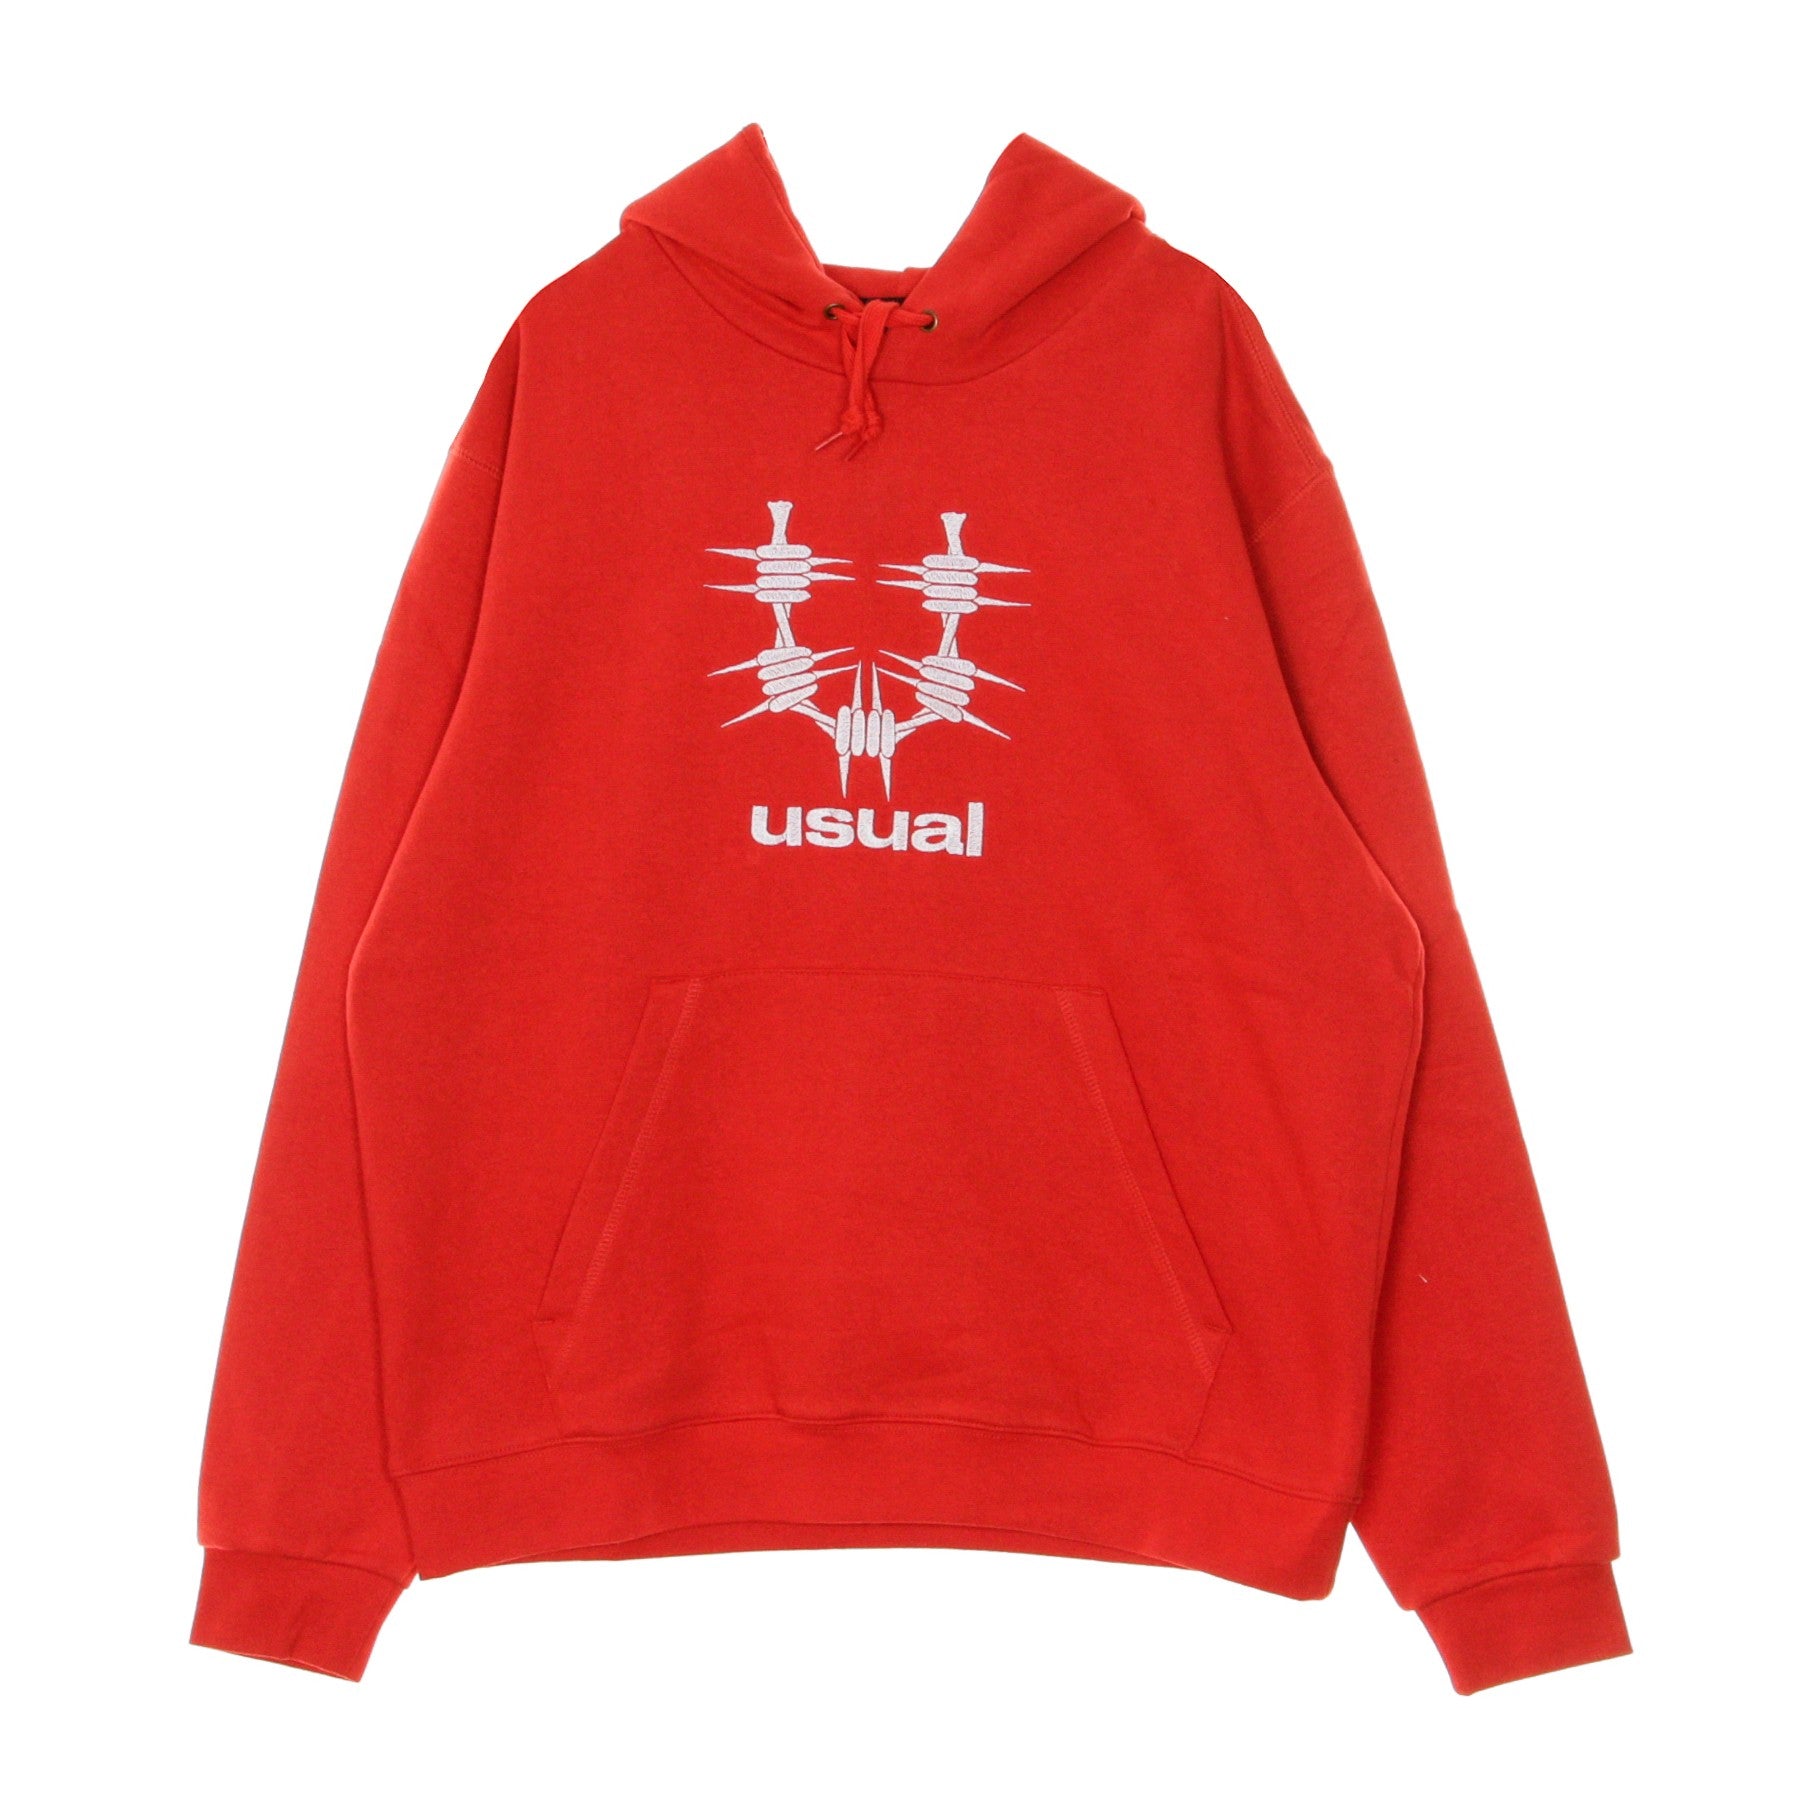 About2 Red Men's Hoodie